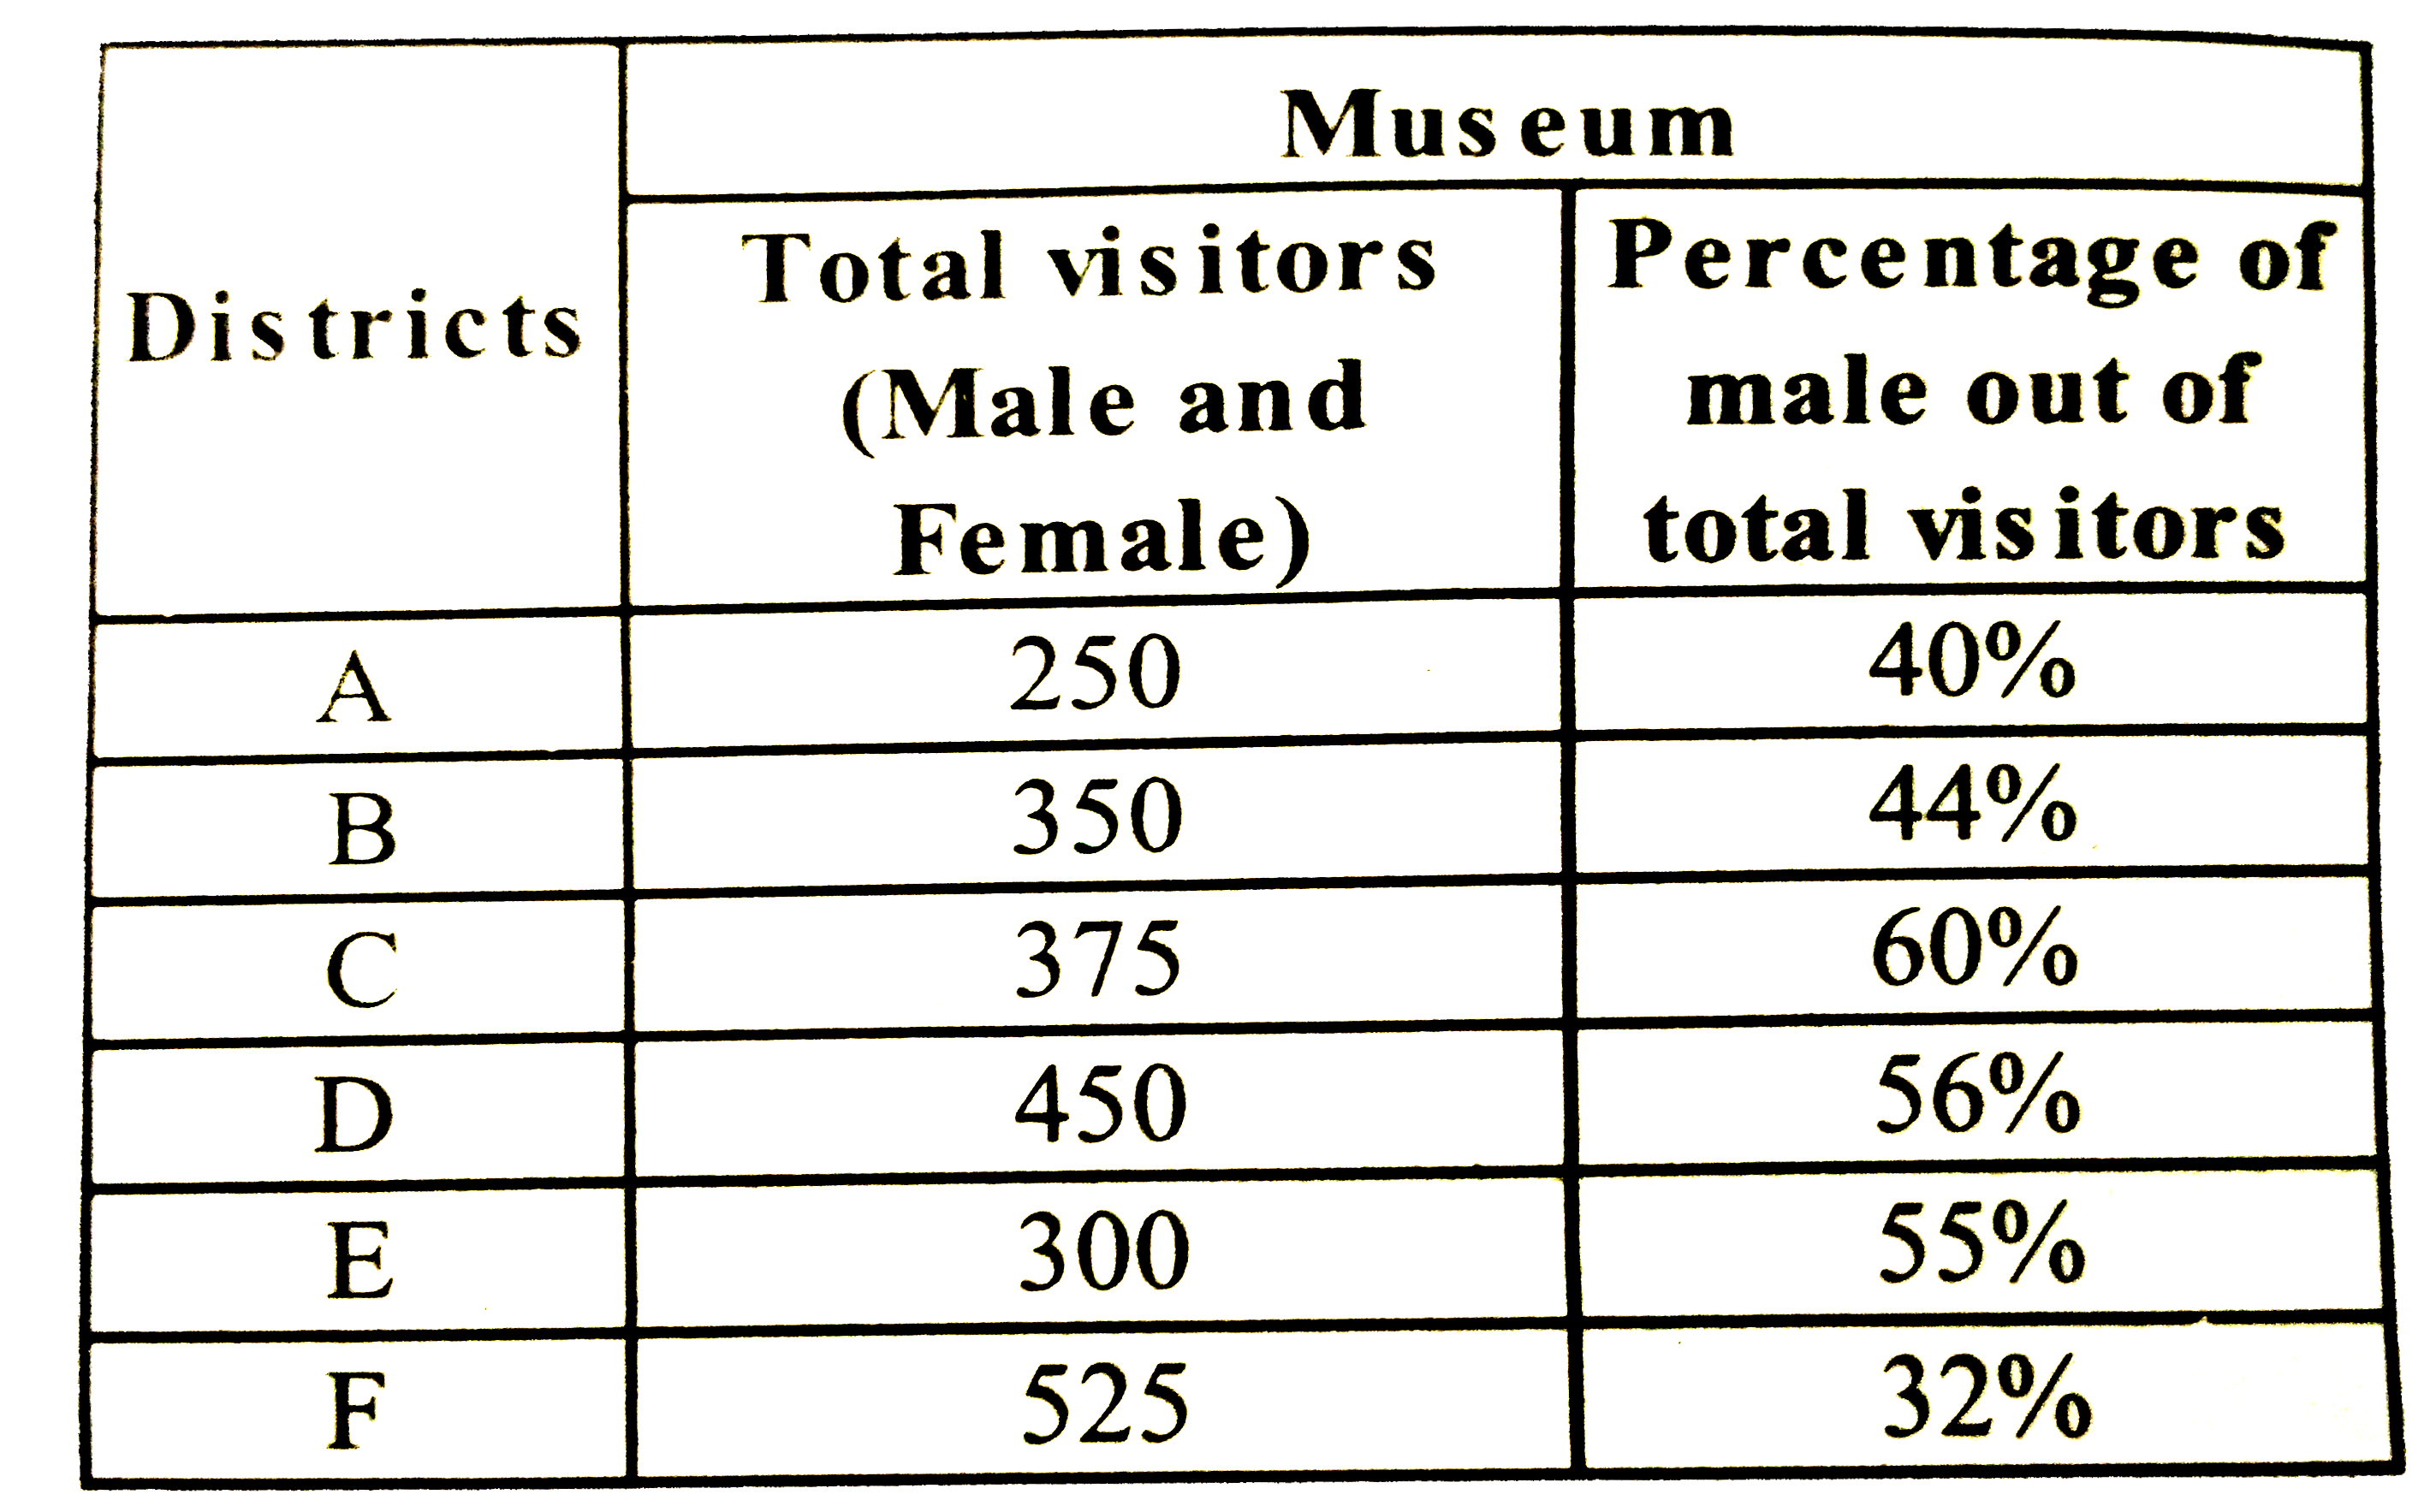 Total number of visitors and Percentage of male and out of these visitors are give       Male visitors from district C to see the museum are what percent more /less than the female visitors from district E to see the museum ?(Calculate up to two decimal points)